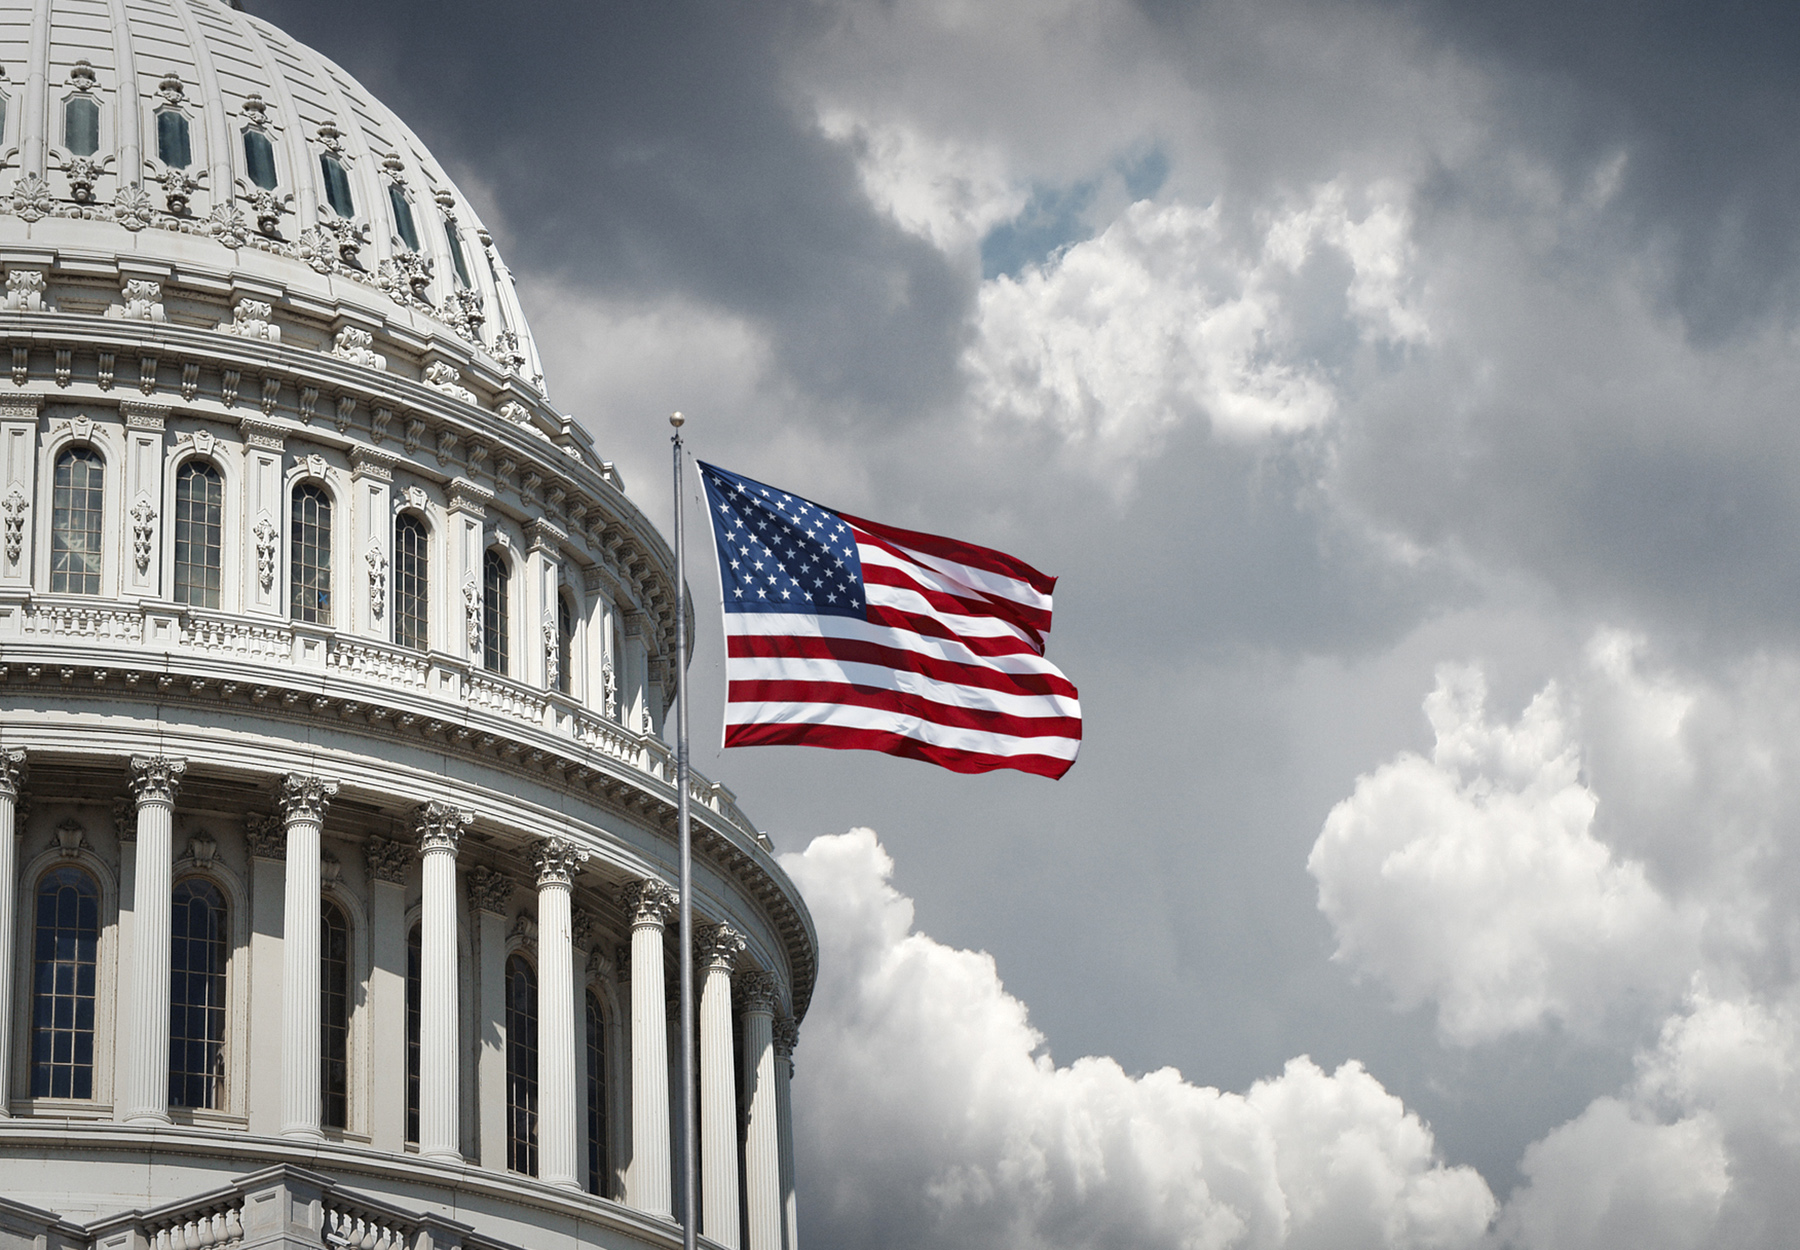 US Capitol and waving American flag beneath a cloudy sky. Stock image.